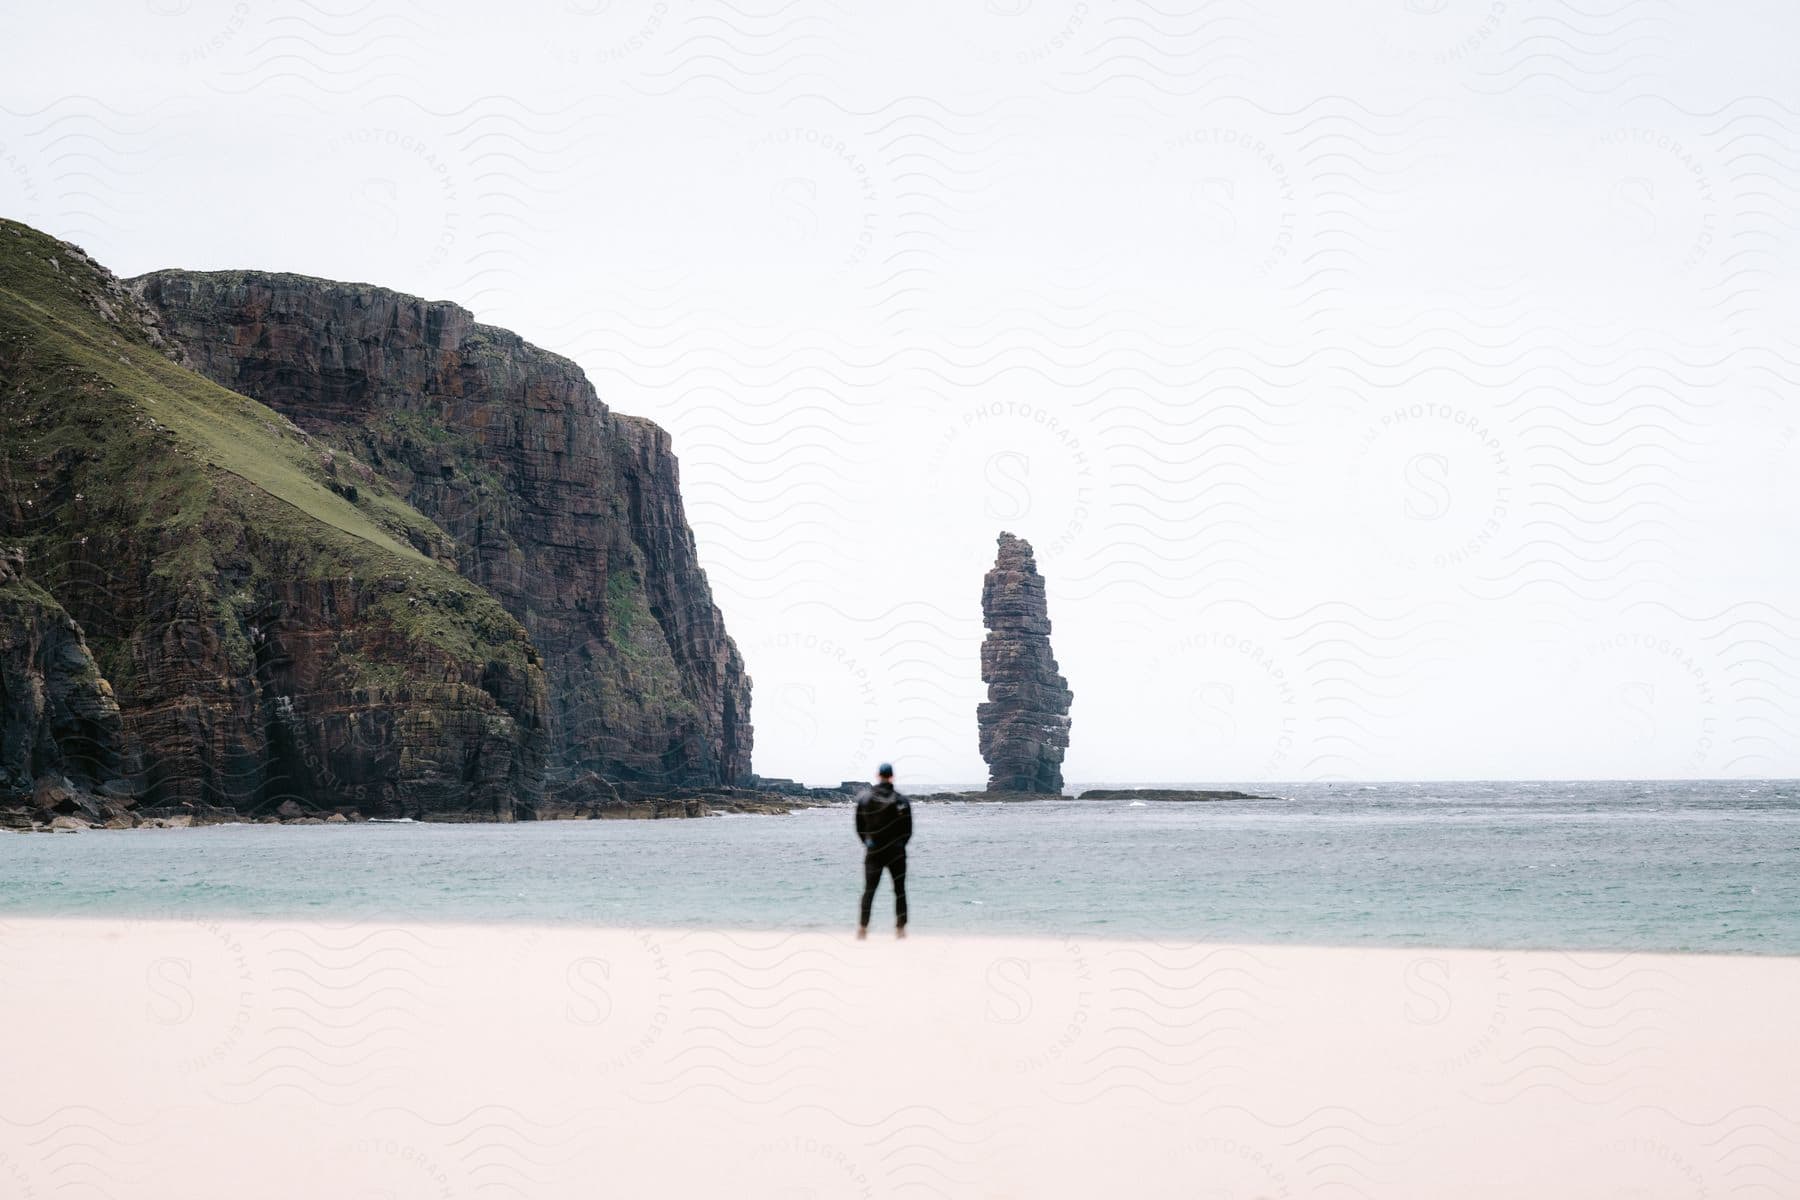 Man with his back to the camera on the beach with the sea coastline and geological formations beside him.